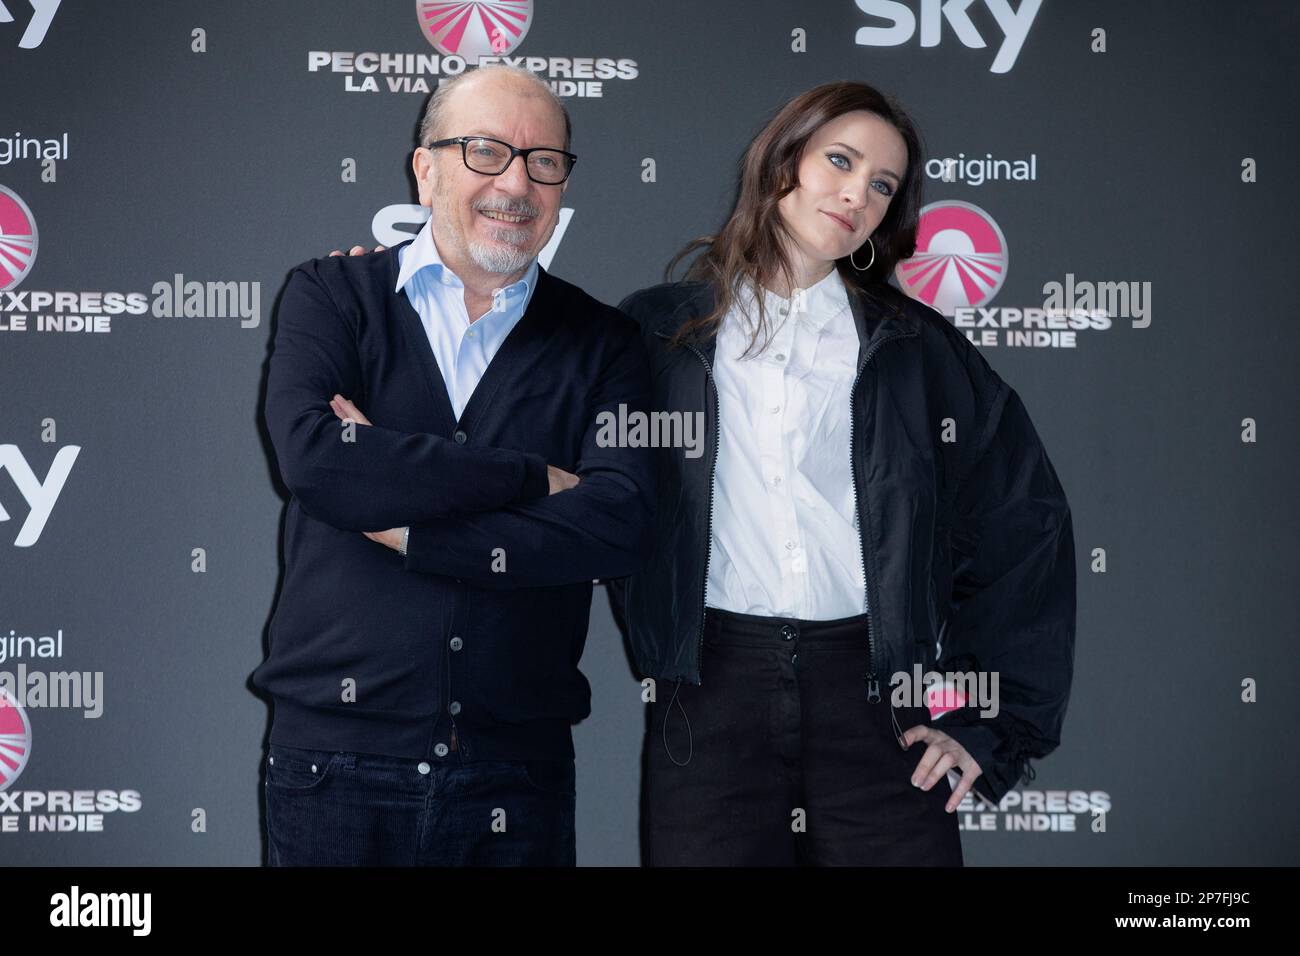 MILAN, ITALY - MARCH 06: Dario Vergassola and Caterina Vergassola attend the photo-call for 'Pechino Express La via delle Indie' Sky Original on March Stock Photo